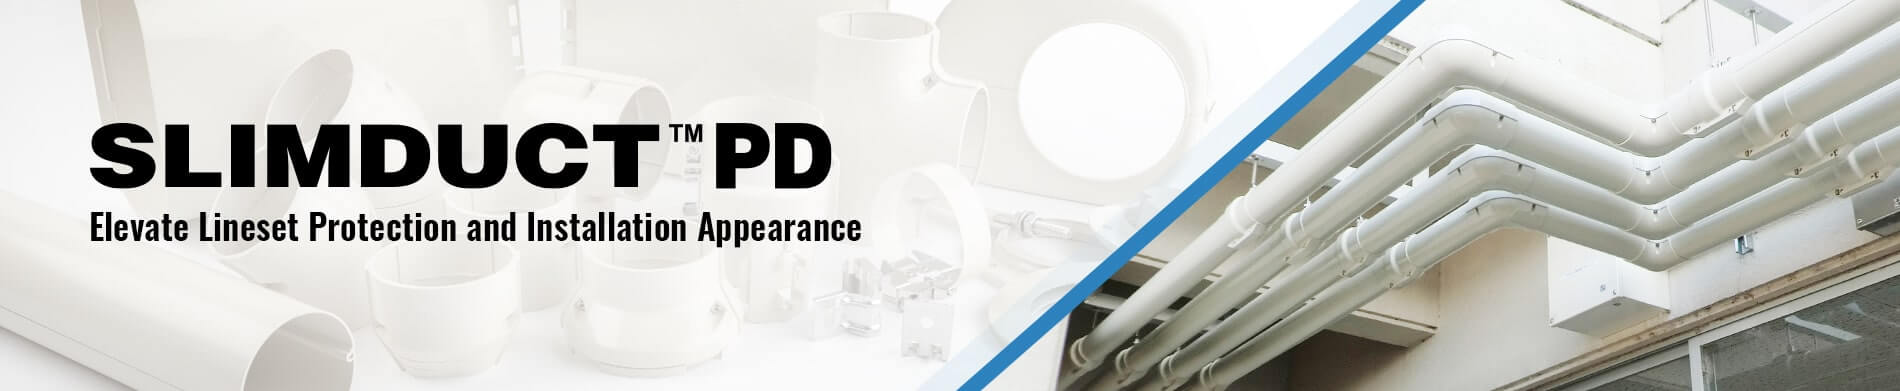 SLIMDUCT PD | Elevate Lineset Protection and Installation Appearance